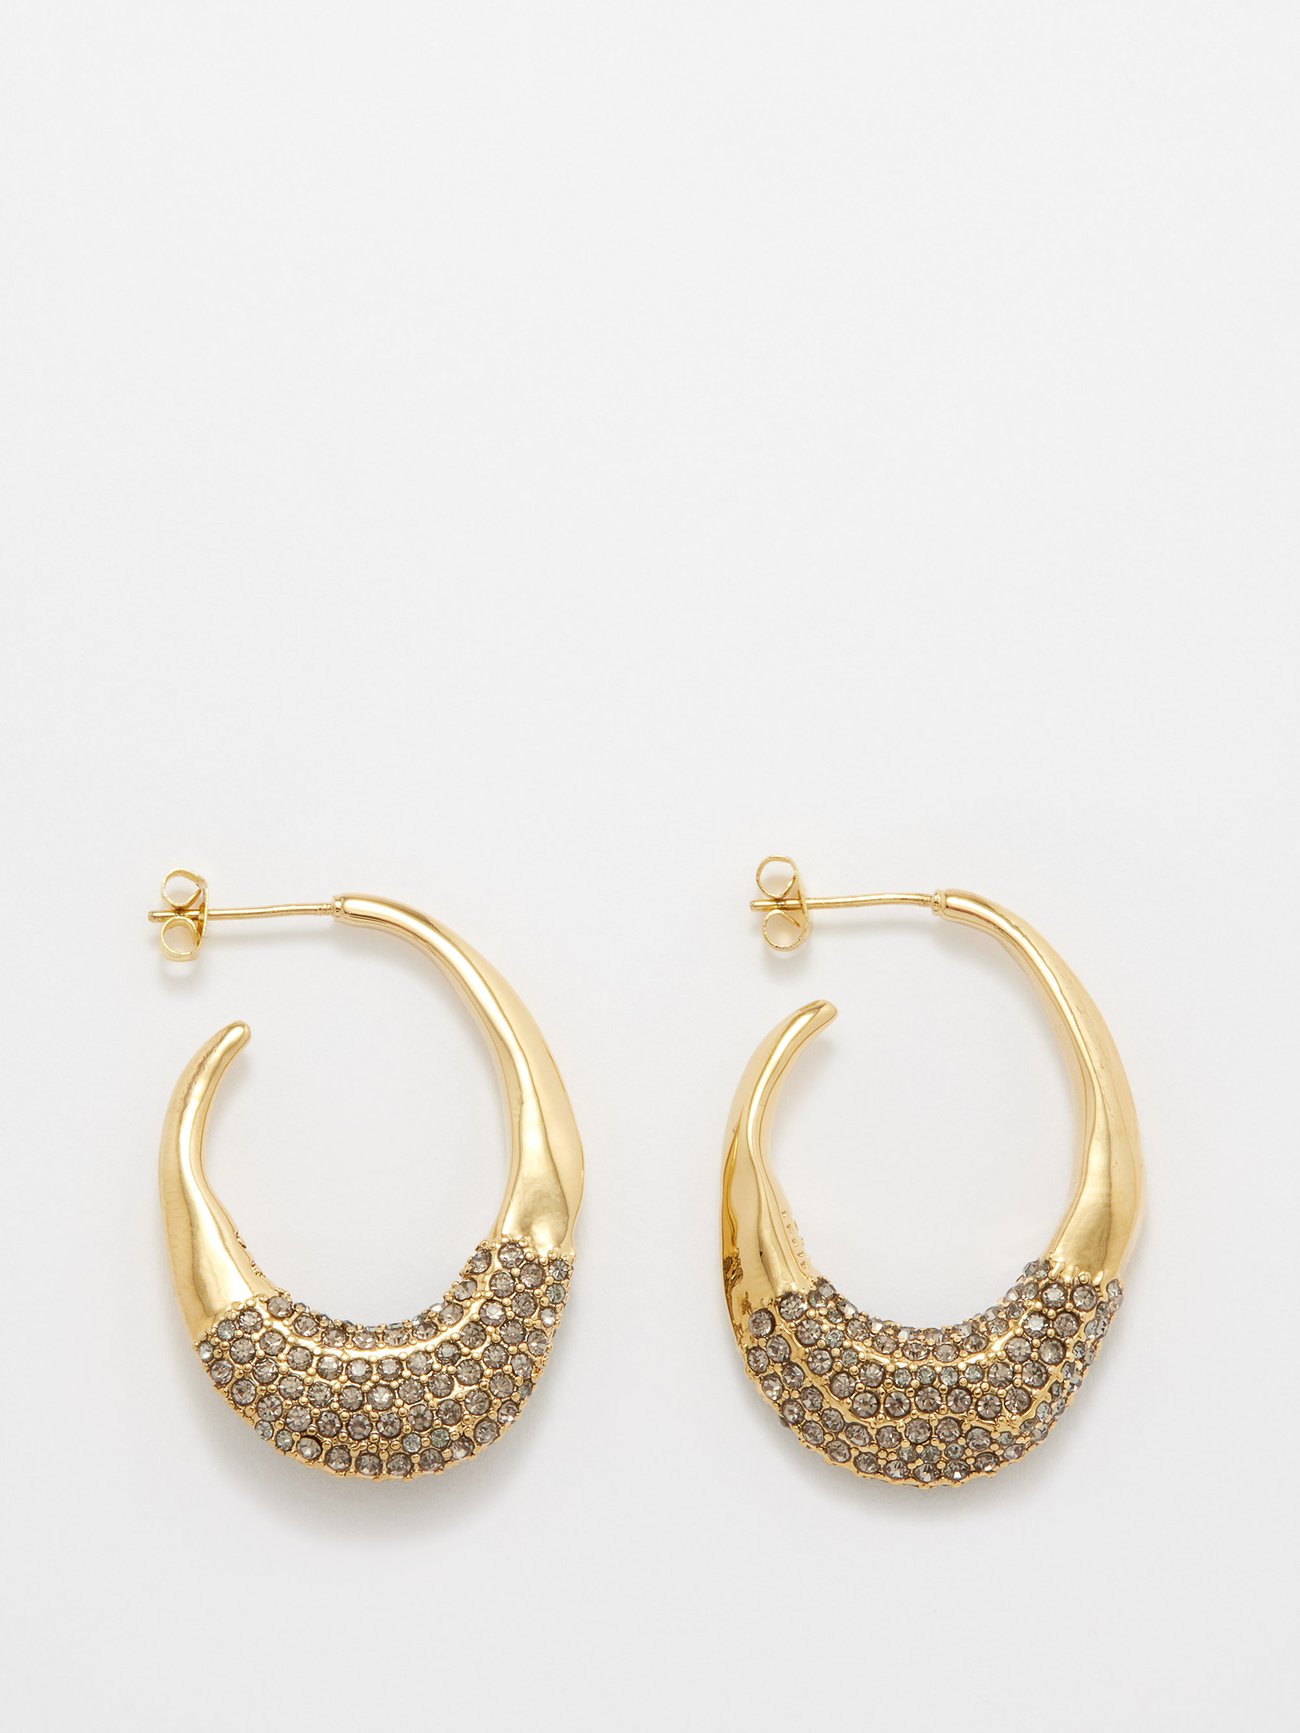 Named after the Aeolian Island off the coast of Italy, By Alona's Panarea earrings are cast in 18kt gold-plated brass set with a glittering pavé of grey crystals.